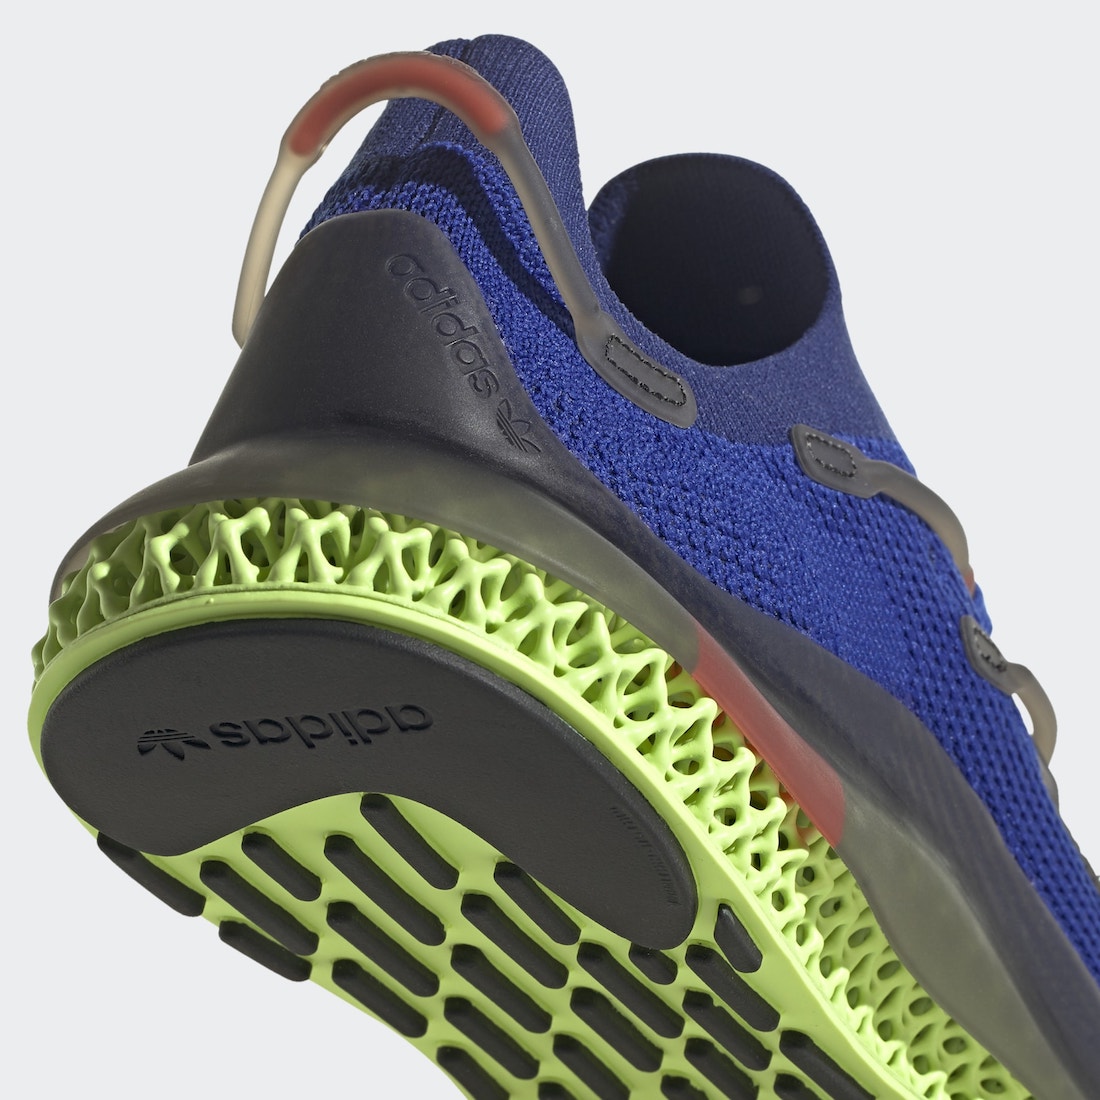 adidas 4D Fusio Bold Blue Flash Yellow H04509 Release Date